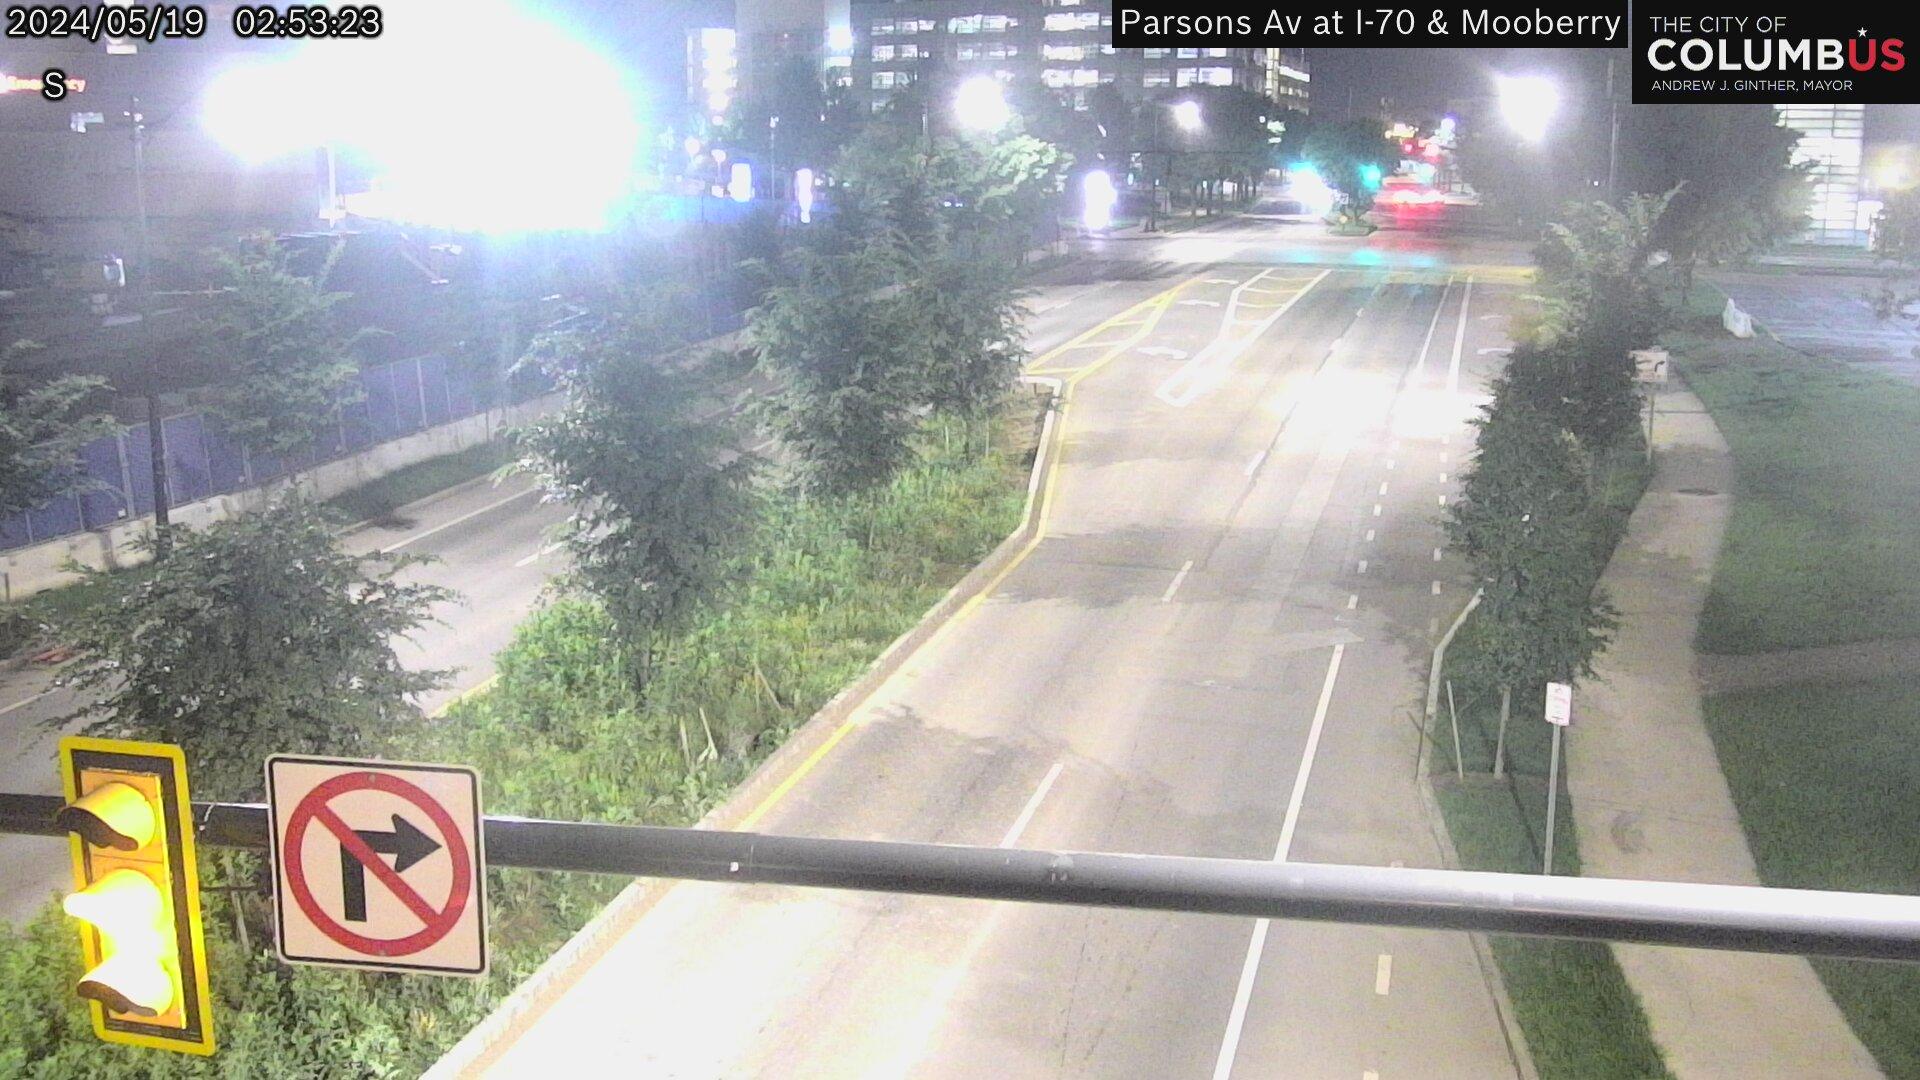 Traffic Cam Livingston Park: City of Columbus) I-70 EB Off Ramp & Mooberry St at Parsons Ave